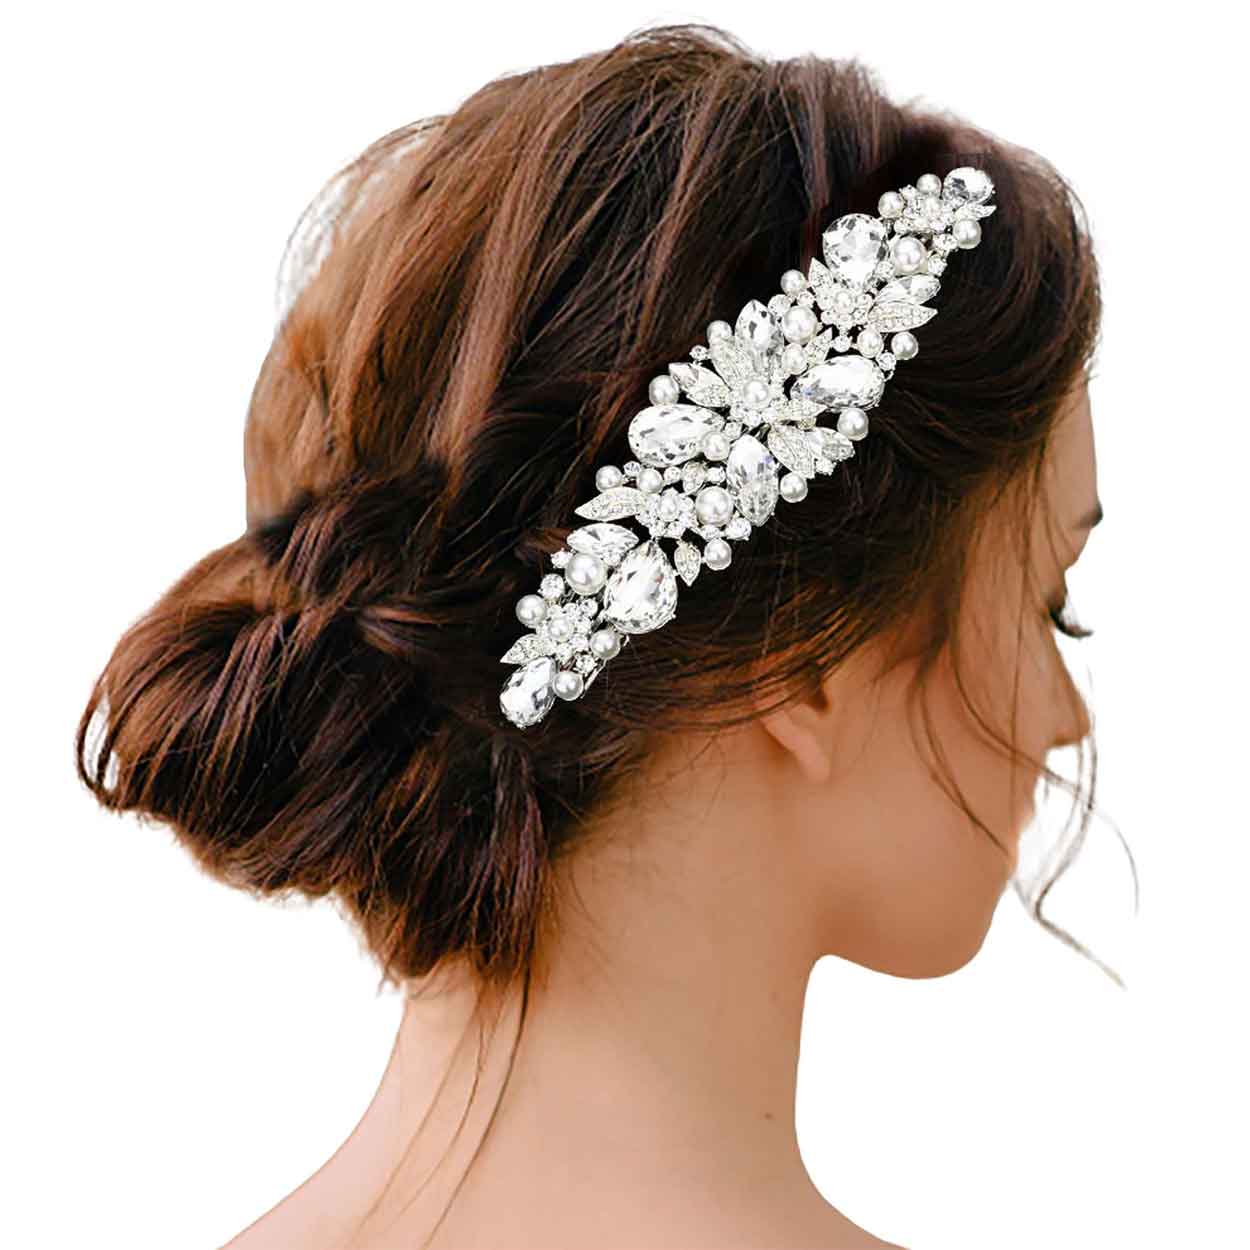 Silver Pearl Multi Stone Embellished Flower Leaf Hair Comb, Perfect for adding just the right amount of shimmer & shine, will add a touch of class, beauty and style to your wedding, prom, special events, embellished pearl stone to keep your hair sparkling all day & all night long. The elegant design will enhance your beauty, attracting everyone's attention and transforming you into a bright star to wear with this hair comb.